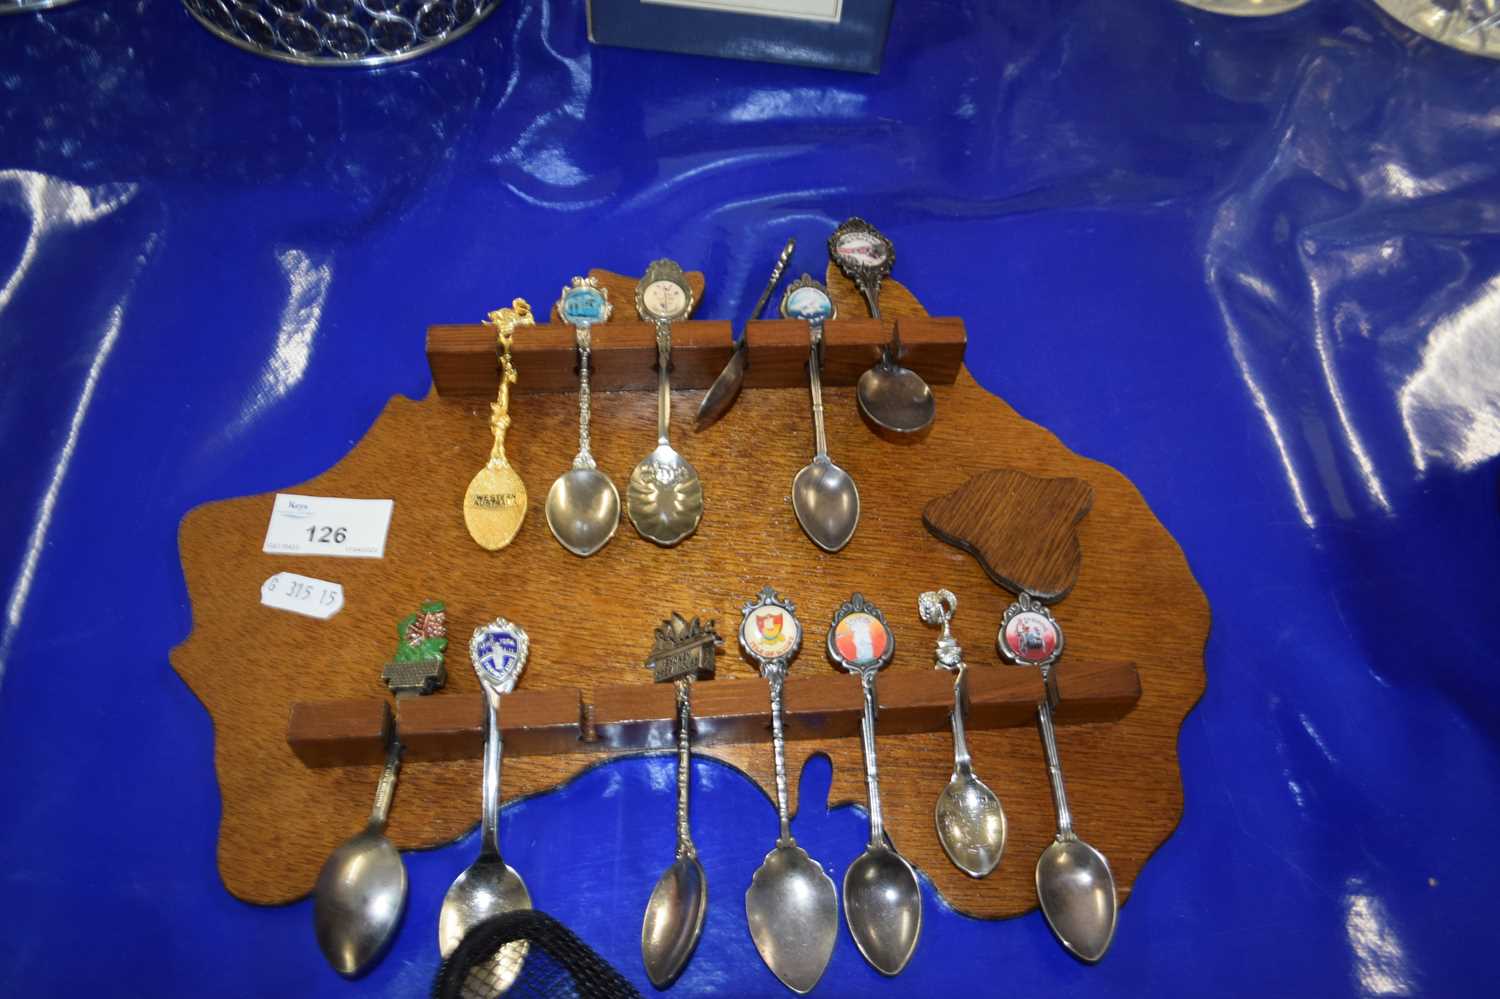 Australian wall display rack containing various crested spoons